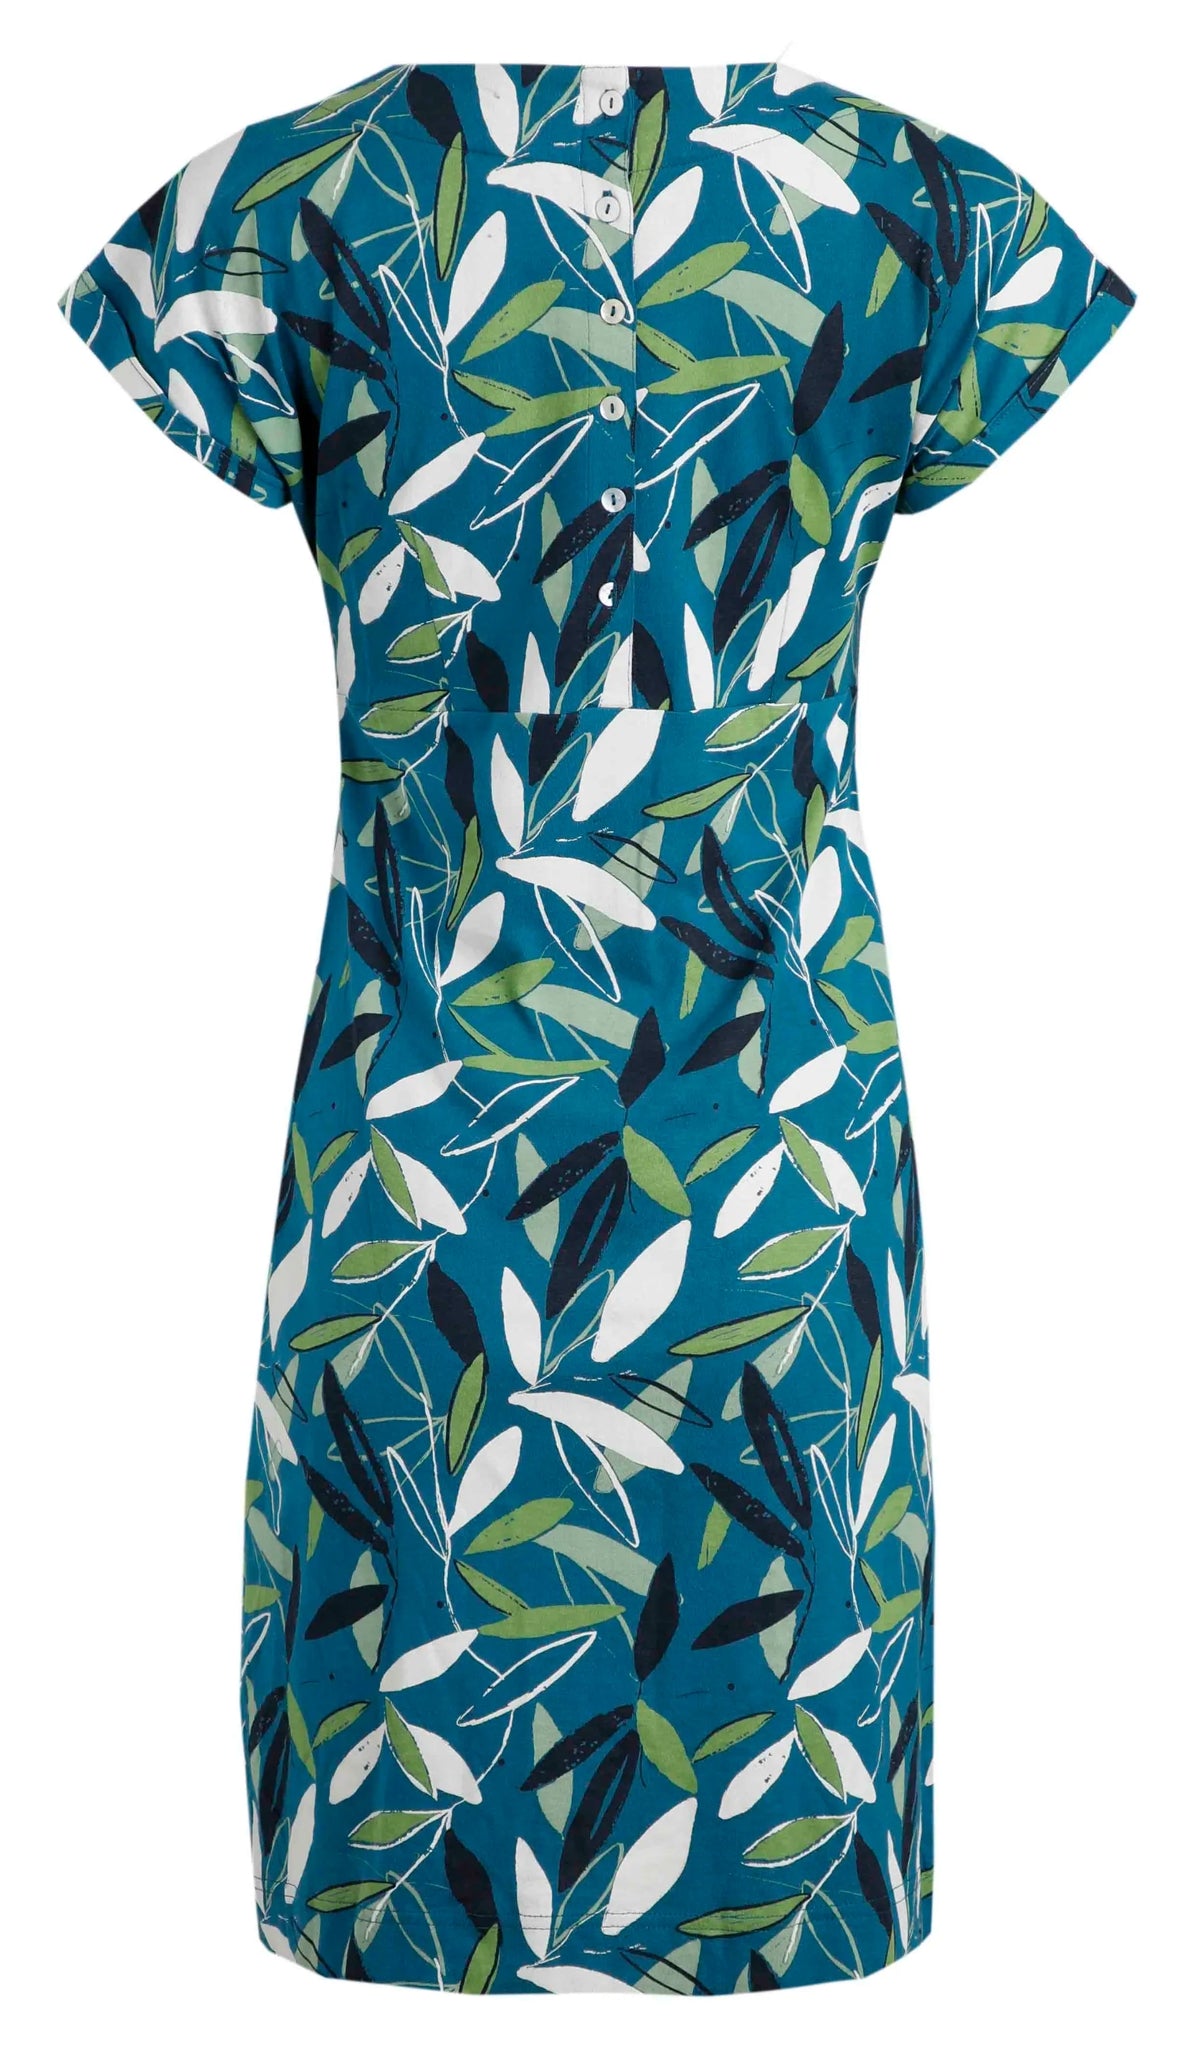 Women's floral printed short sleeve Tallahassee dress from Weird Fish in Deep Sea Blue